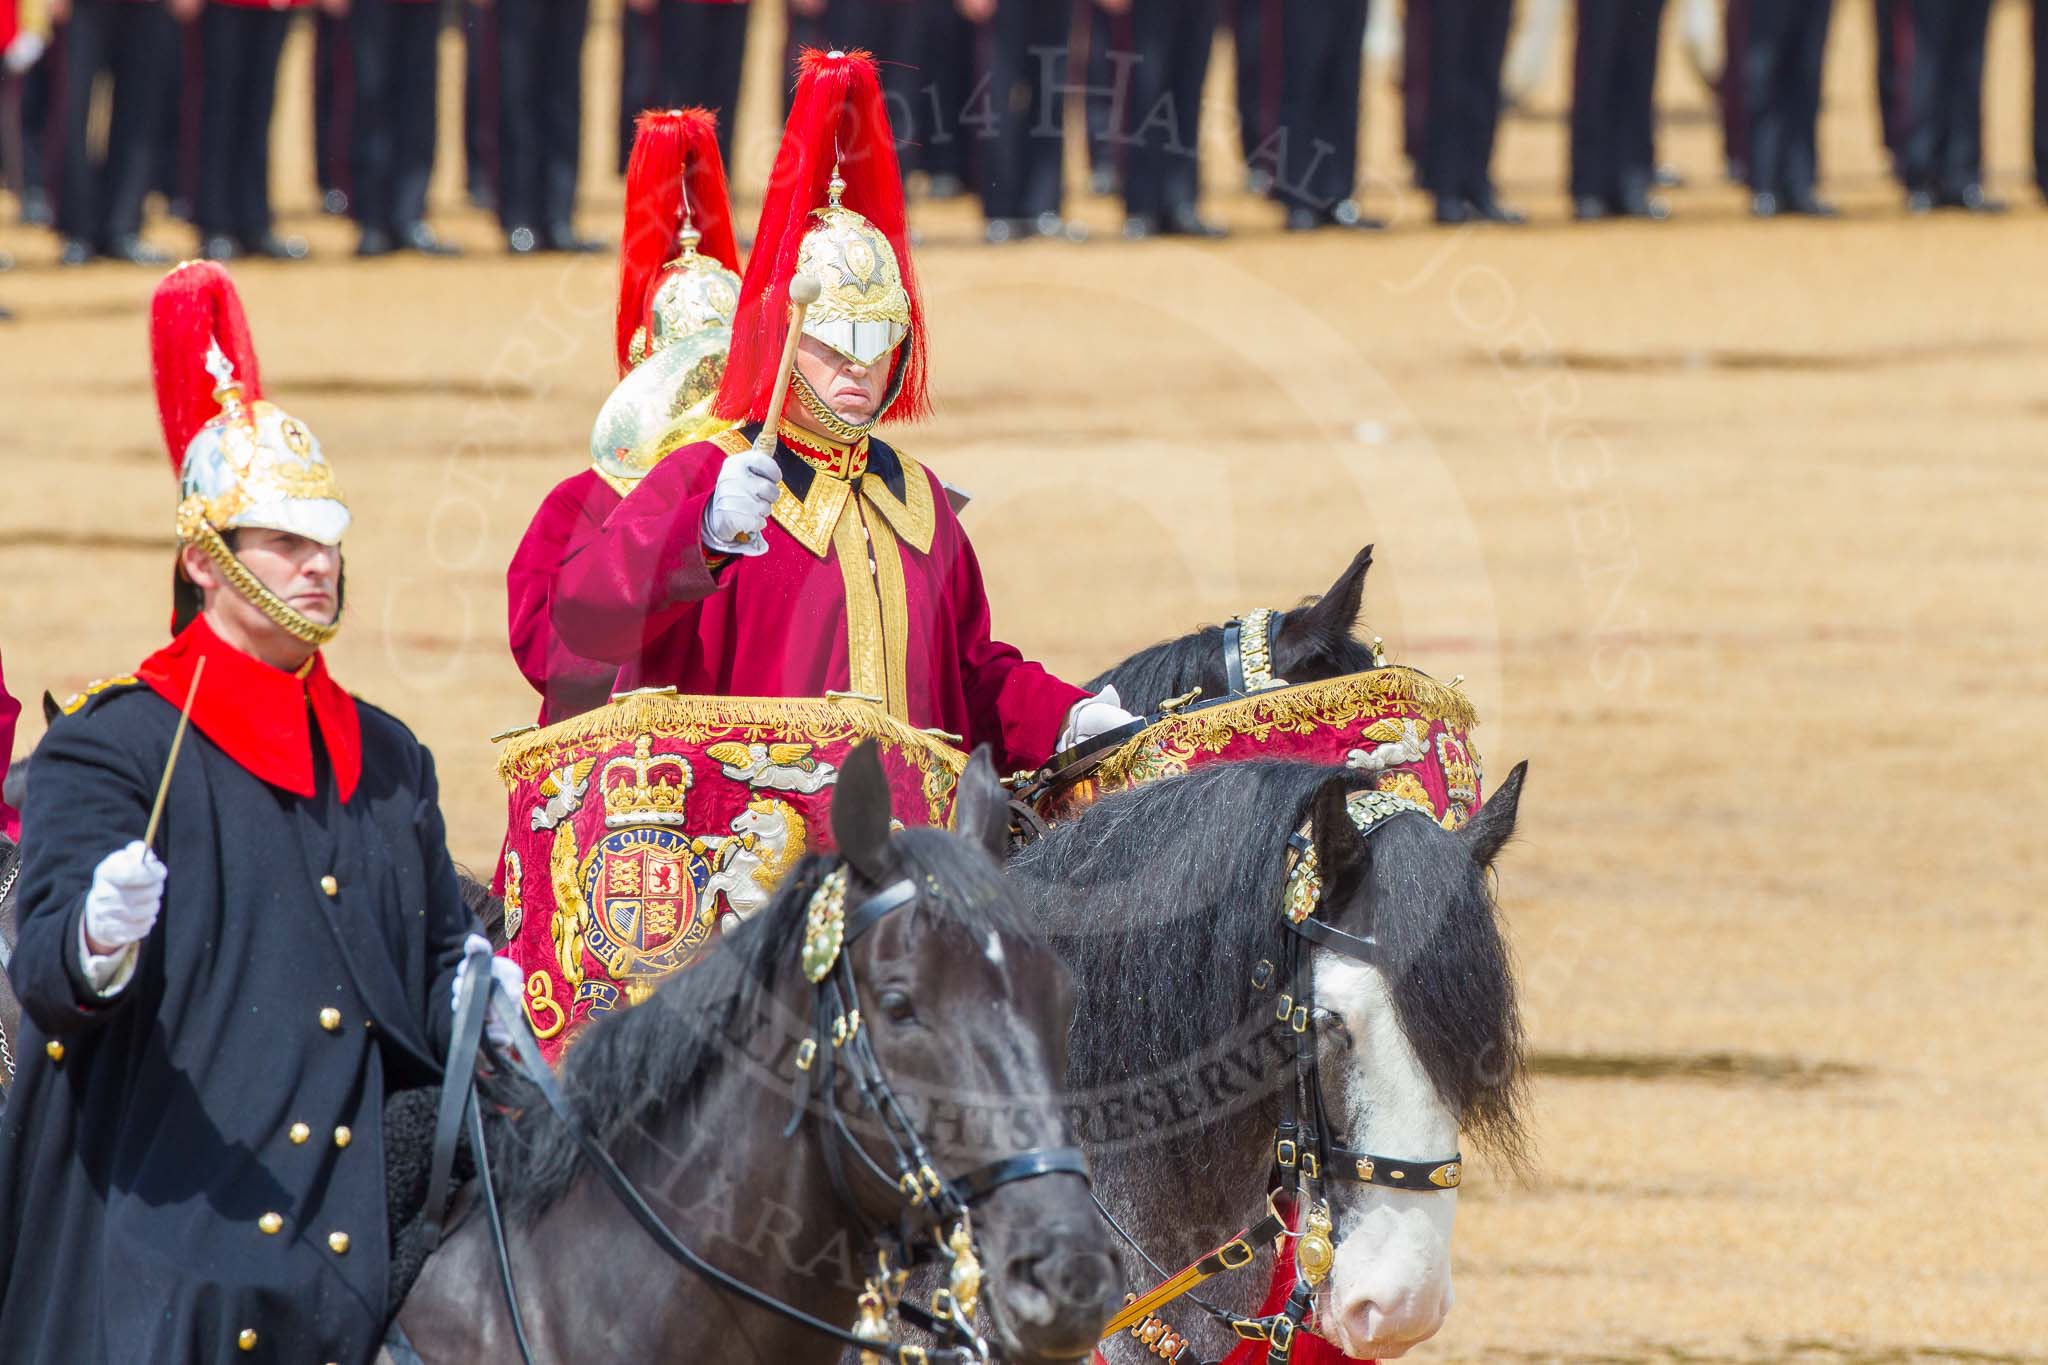 The Colonel's Review 2014.
Horse Guards Parade, Westminster,
London,

United Kingdom,
on 07 June 2014 at 11:56, image #636